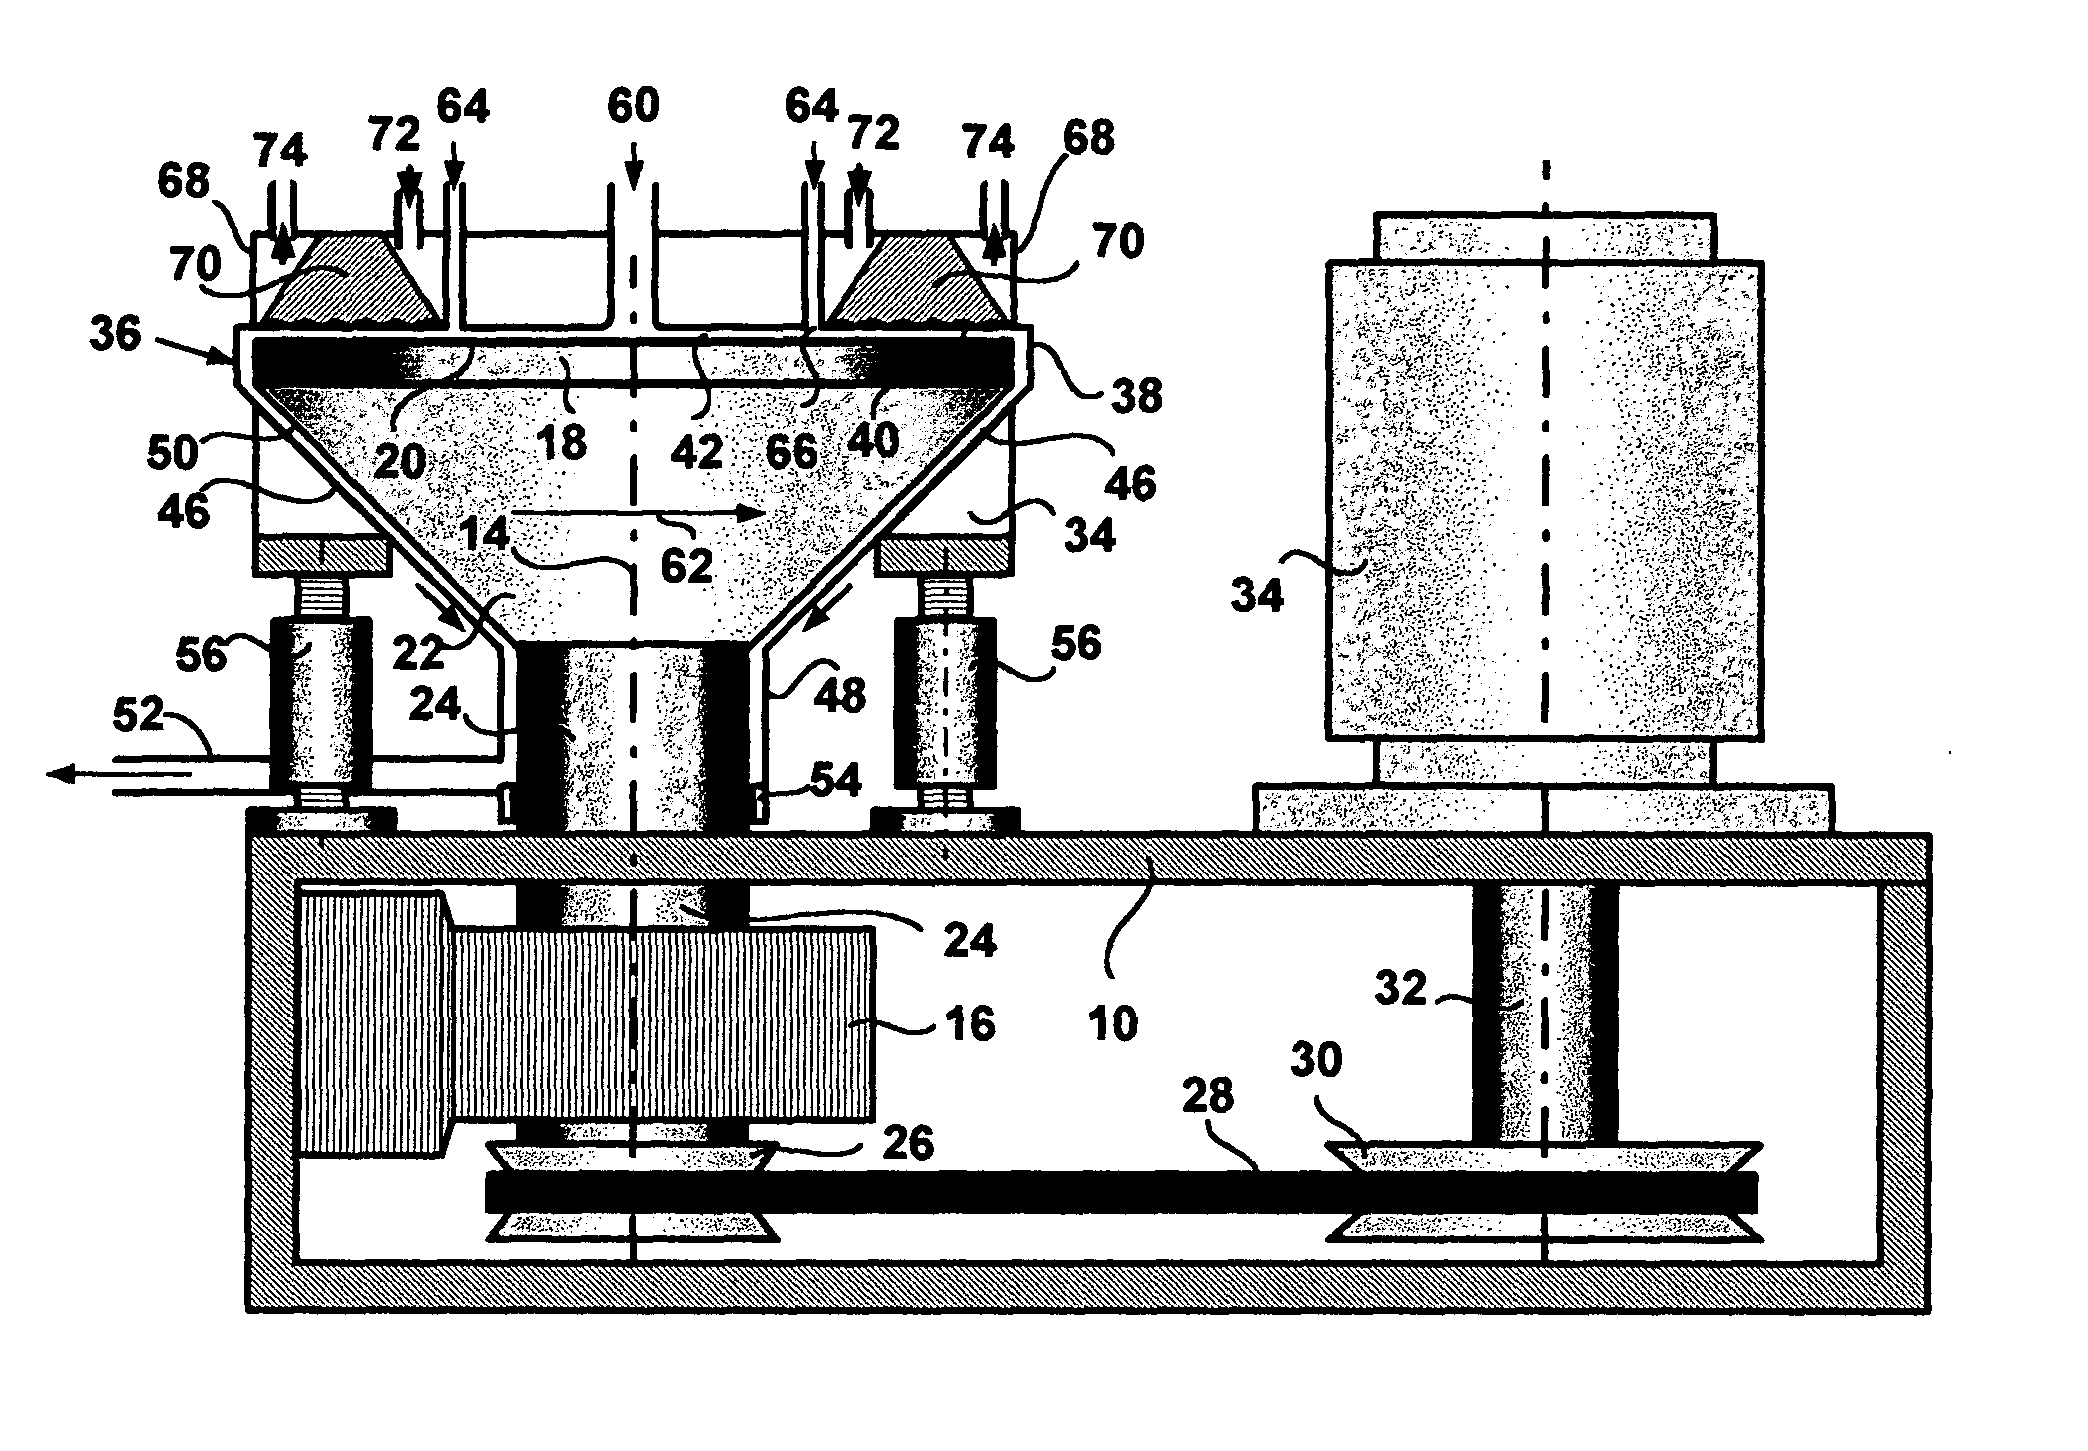 Methods of operating surface reactors and reactors employing such methods